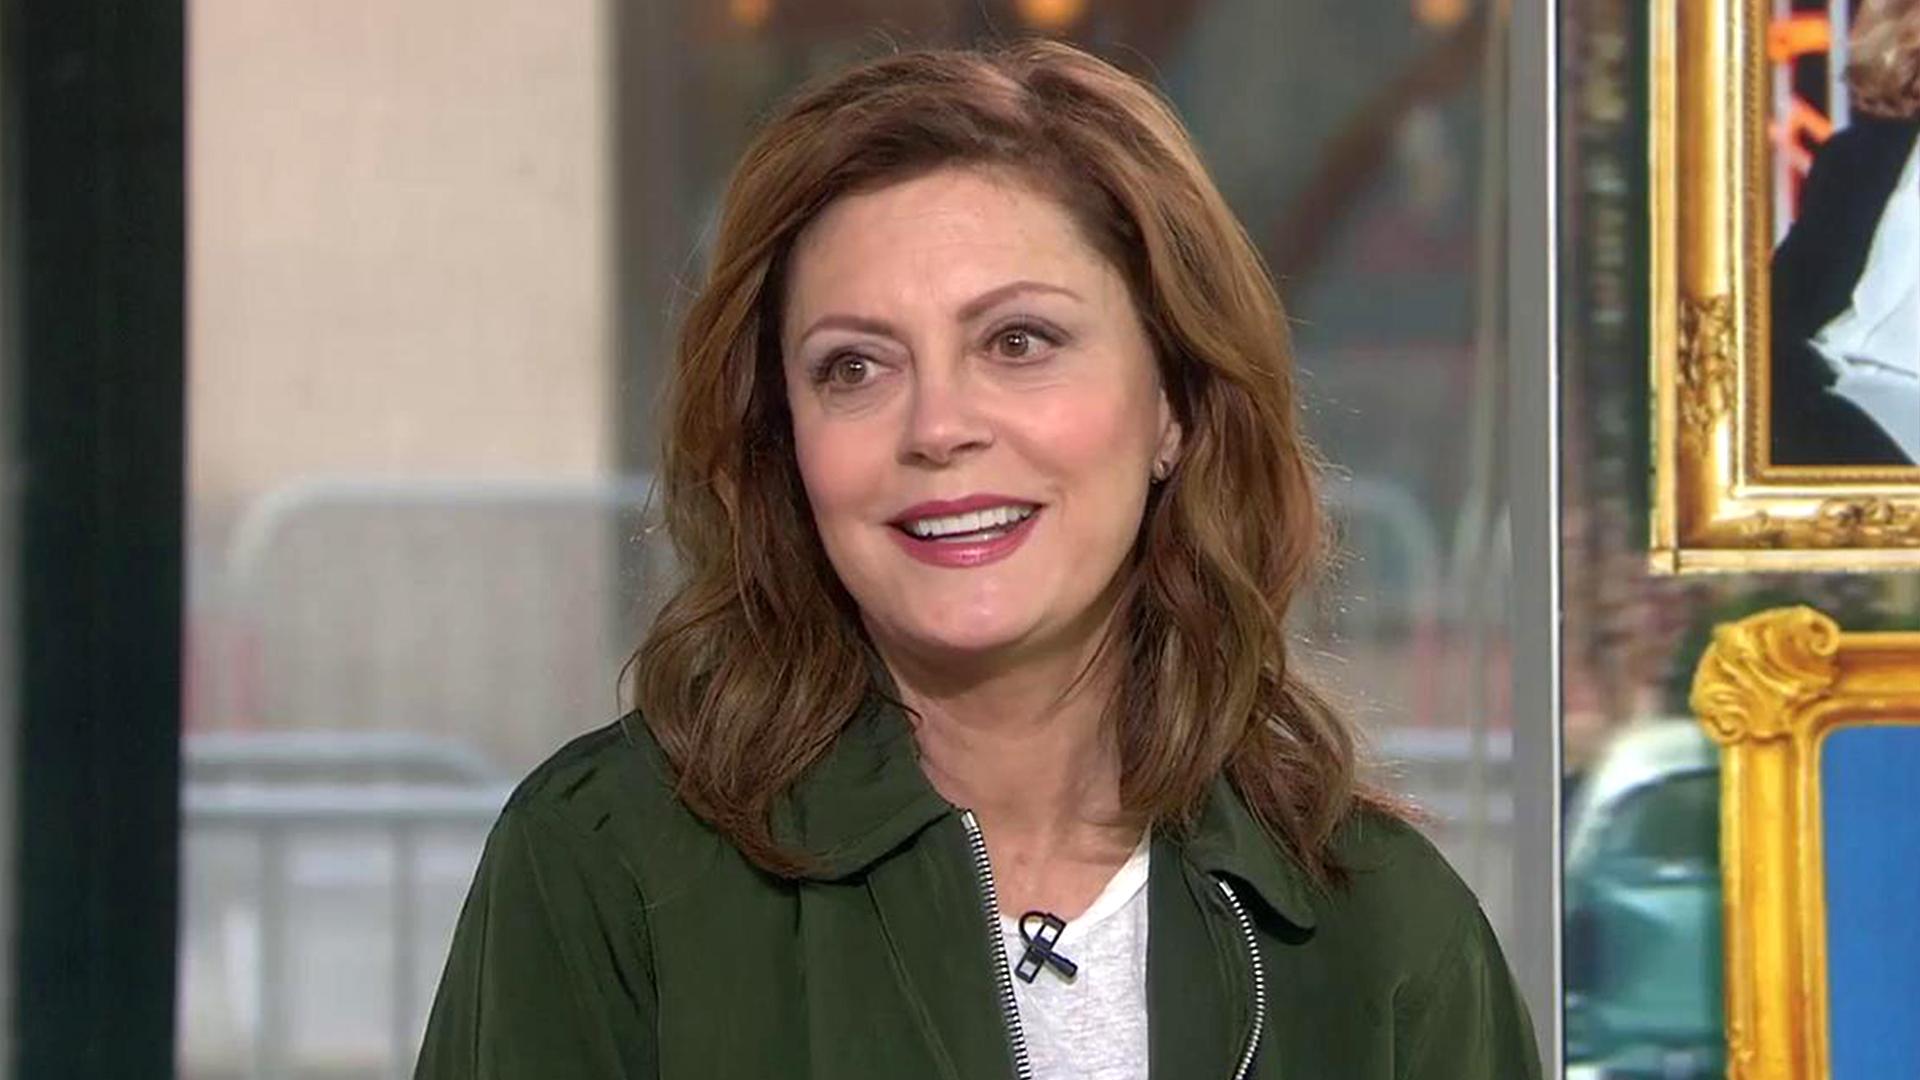 Susan Sarandon on roles for older women: 'There's a lack of imagination'